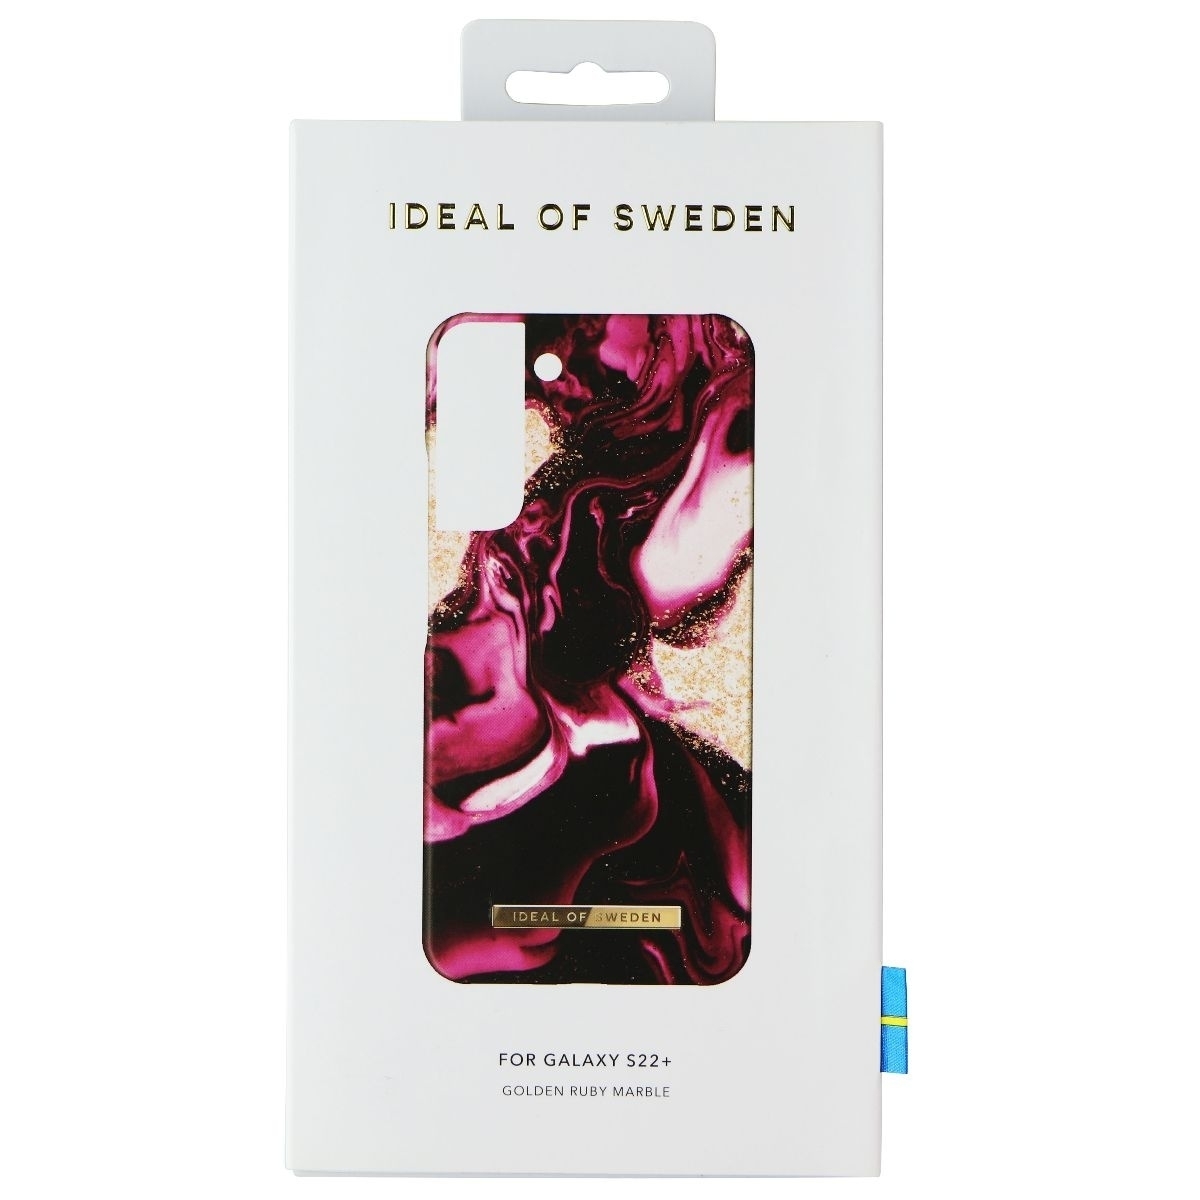 IDeal Of Sweden Hard Case For Samsung Galaxy (S22+) - Golden Ruby Marble